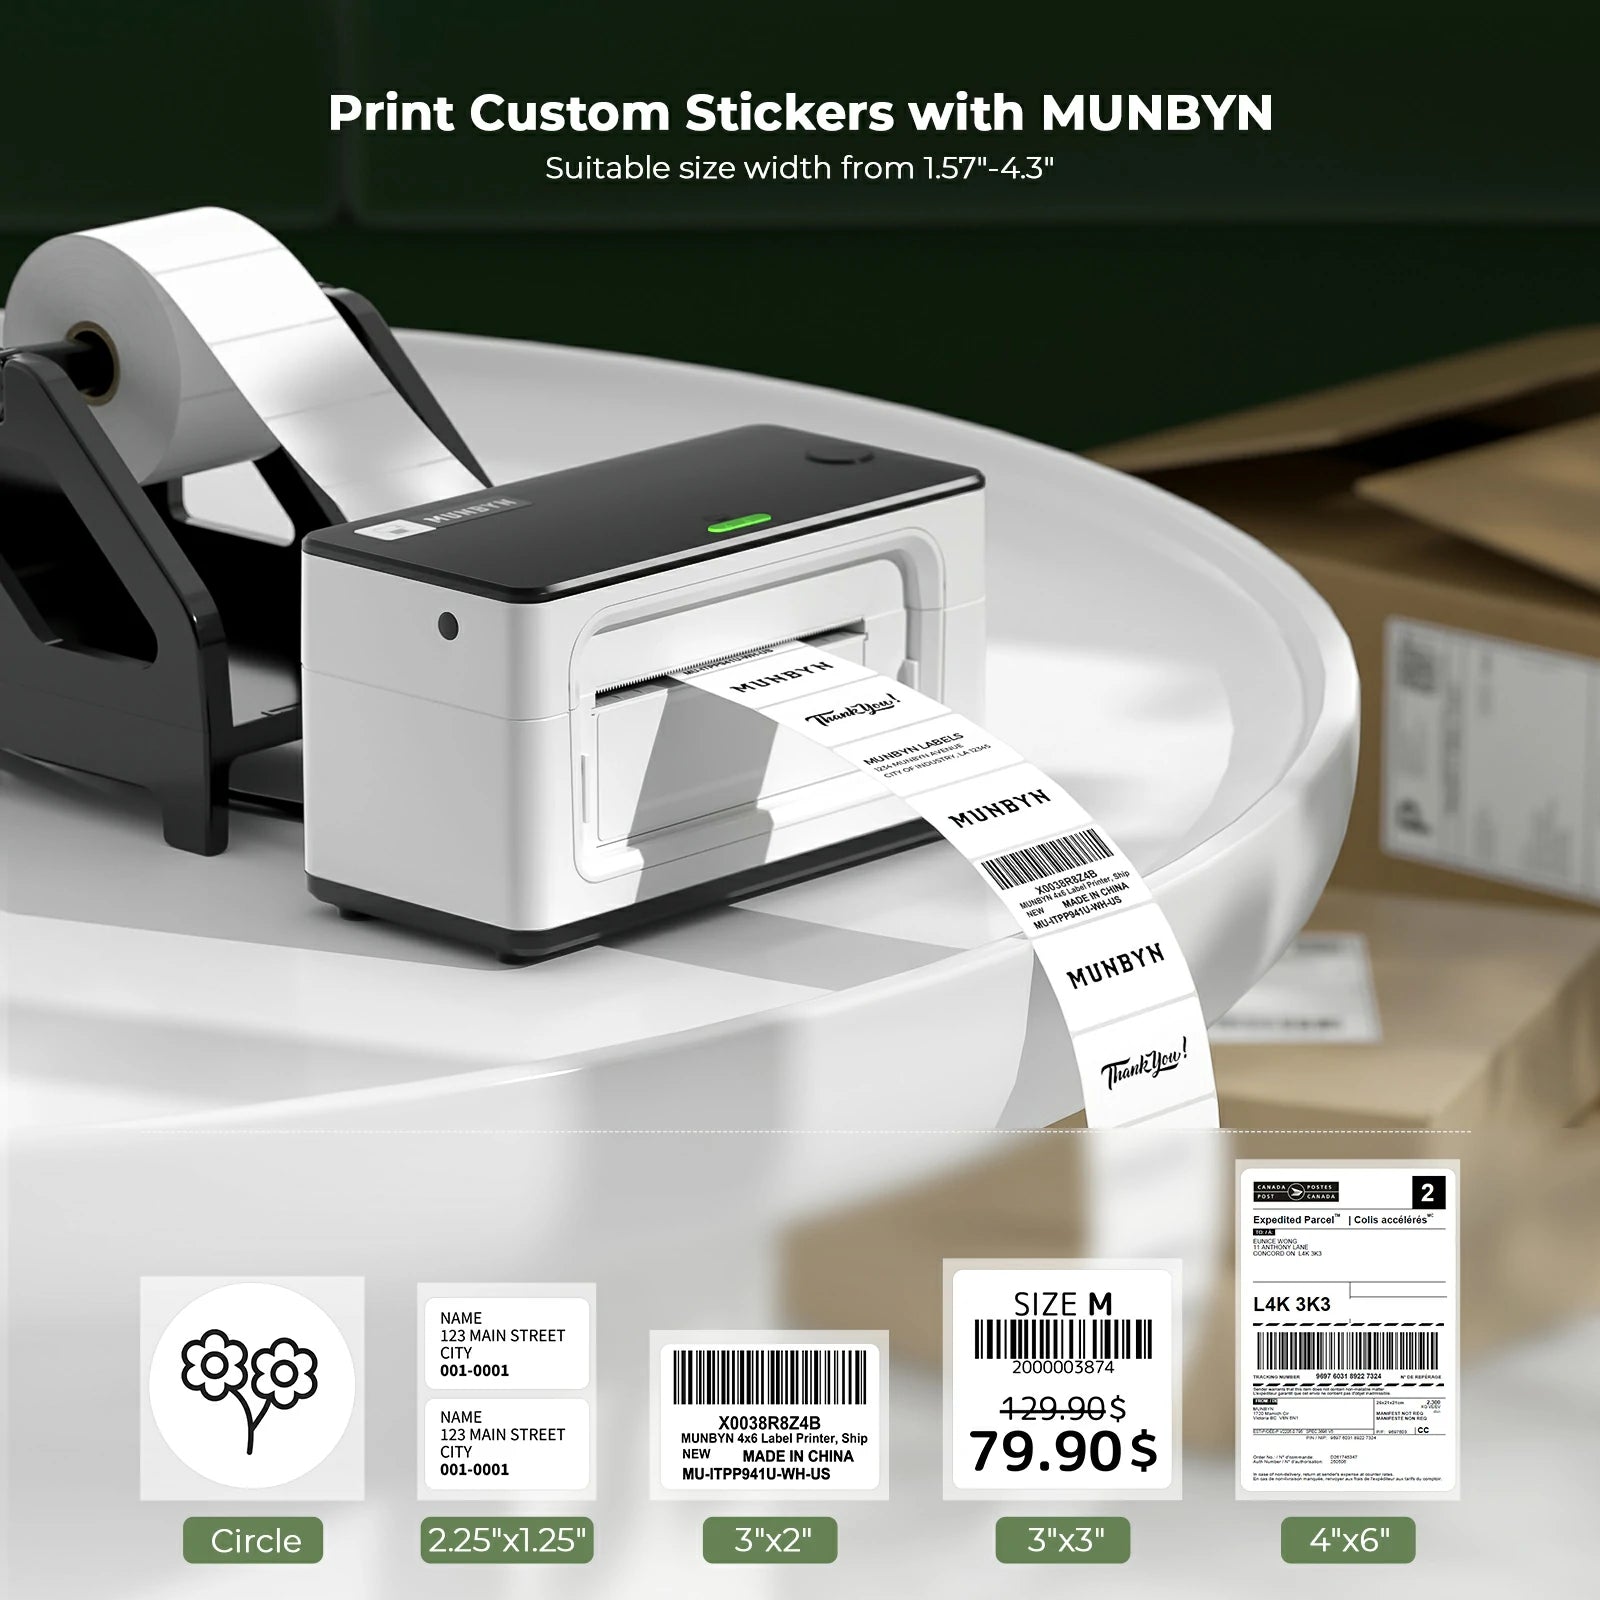 MUNBYN thermal printer can print thermal labels from 1.57 to 4.3 inches wide and serve diverse needs.